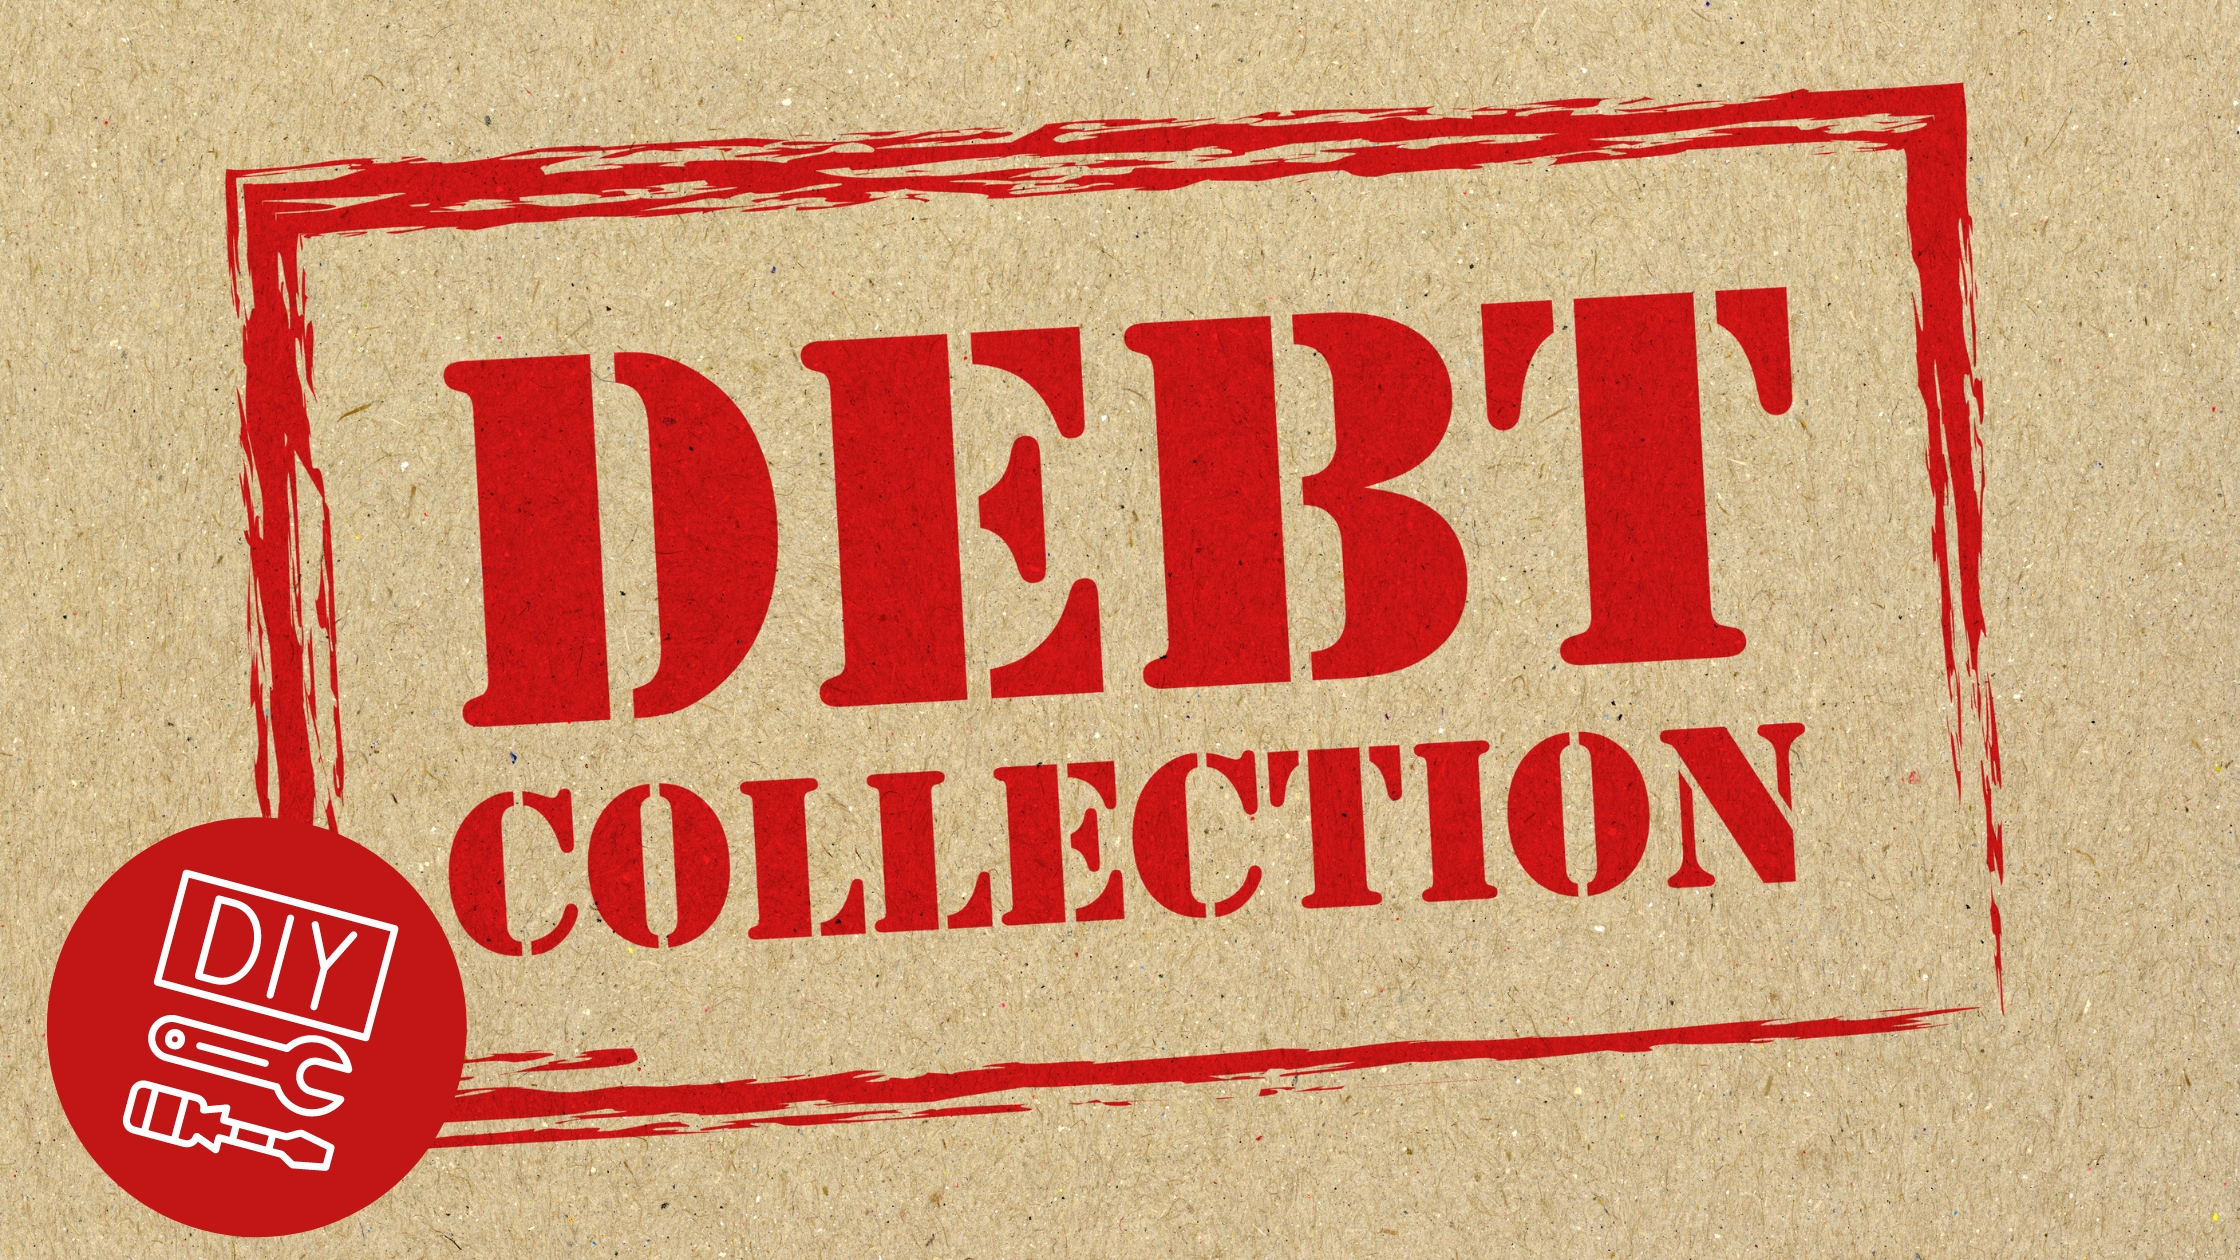 Red stamp with black text "DIY DEBT COLLECTION" on cardboard surface.